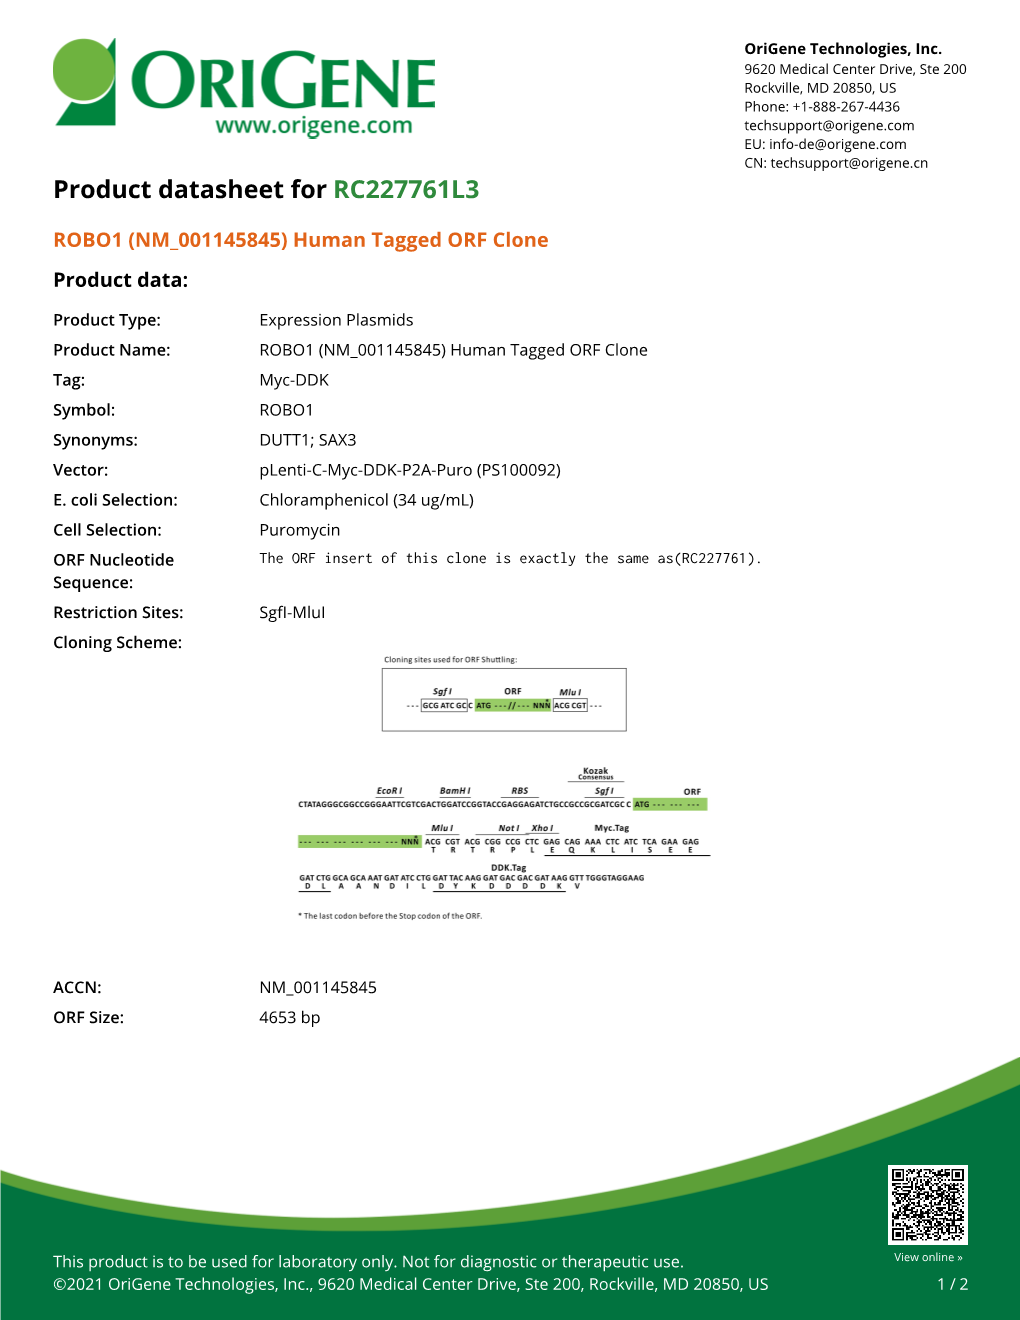 ROBO1 (NM 001145845) Human Tagged ORF Clone Product Data